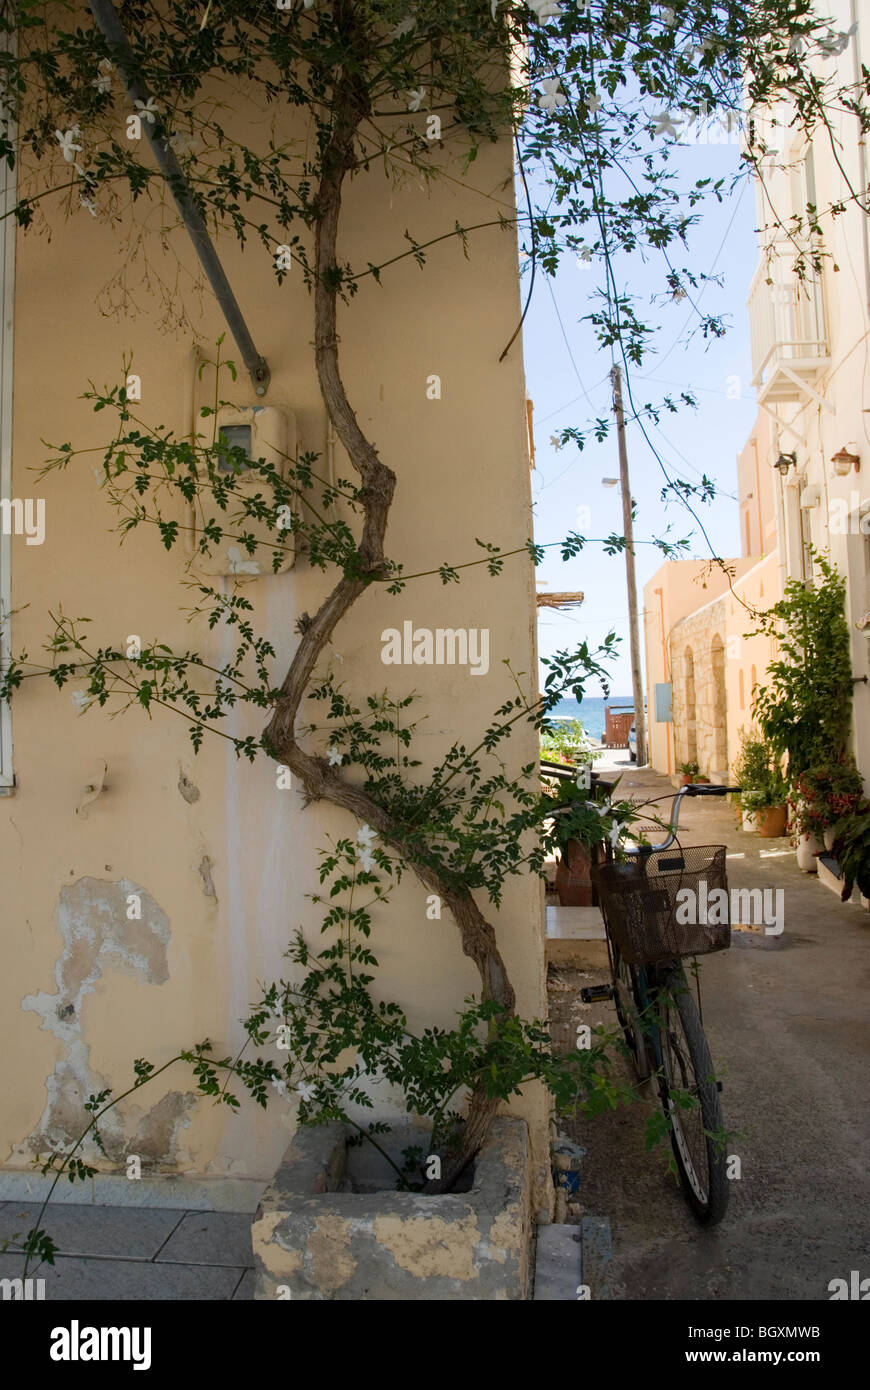 An alleyway leading to the sea in Greece Stock Photo